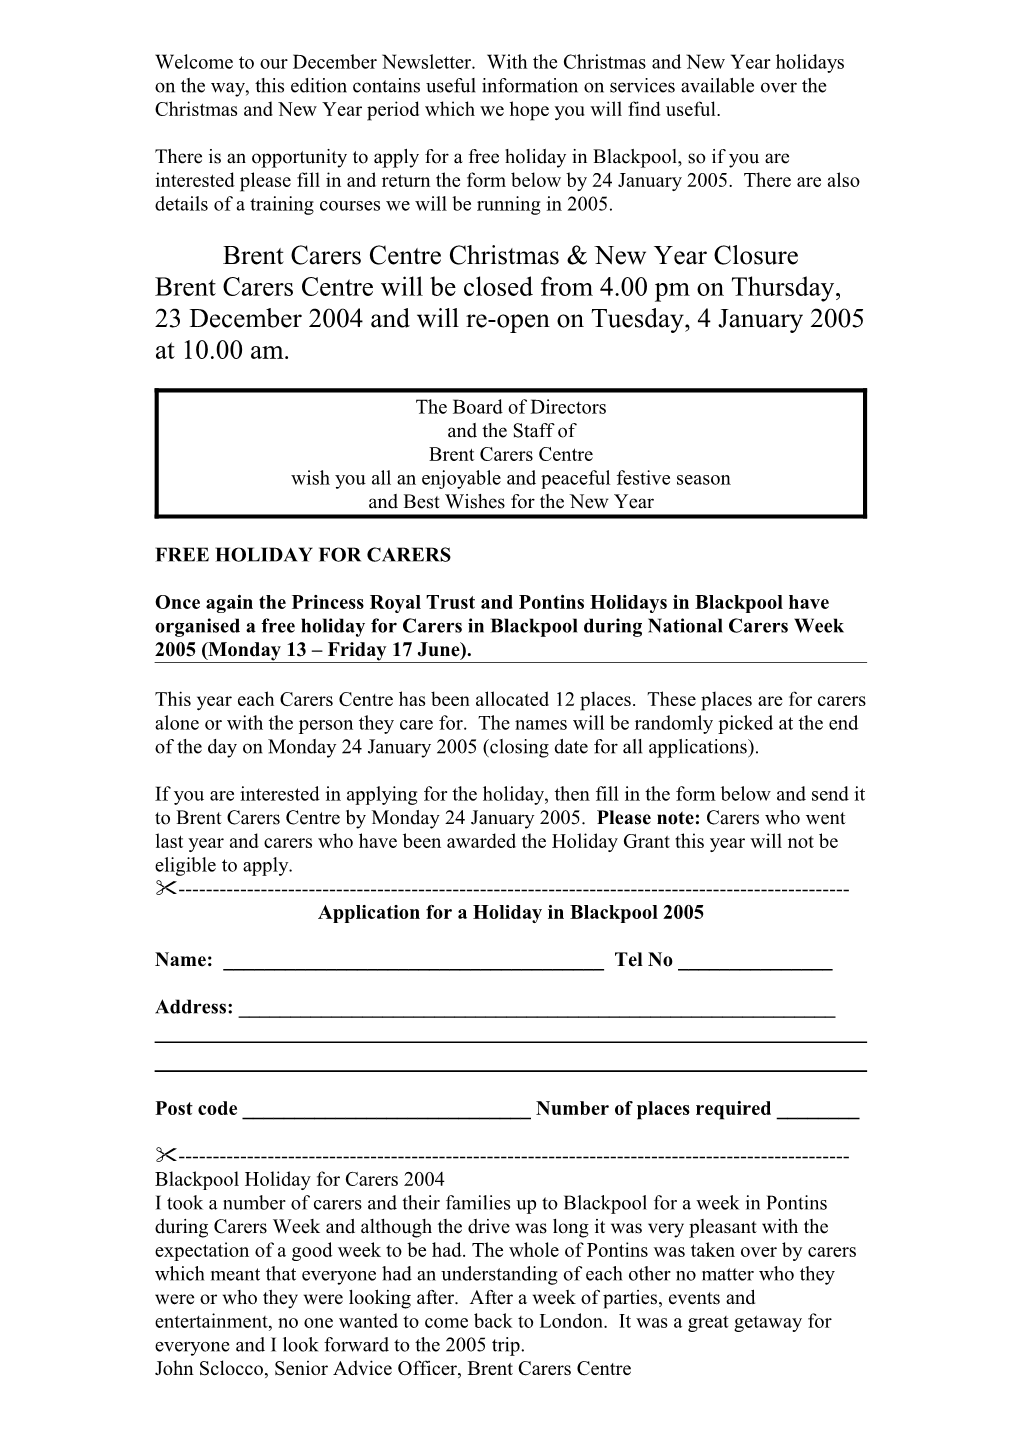 Brent Carers Centre Christmas & New Year Closure